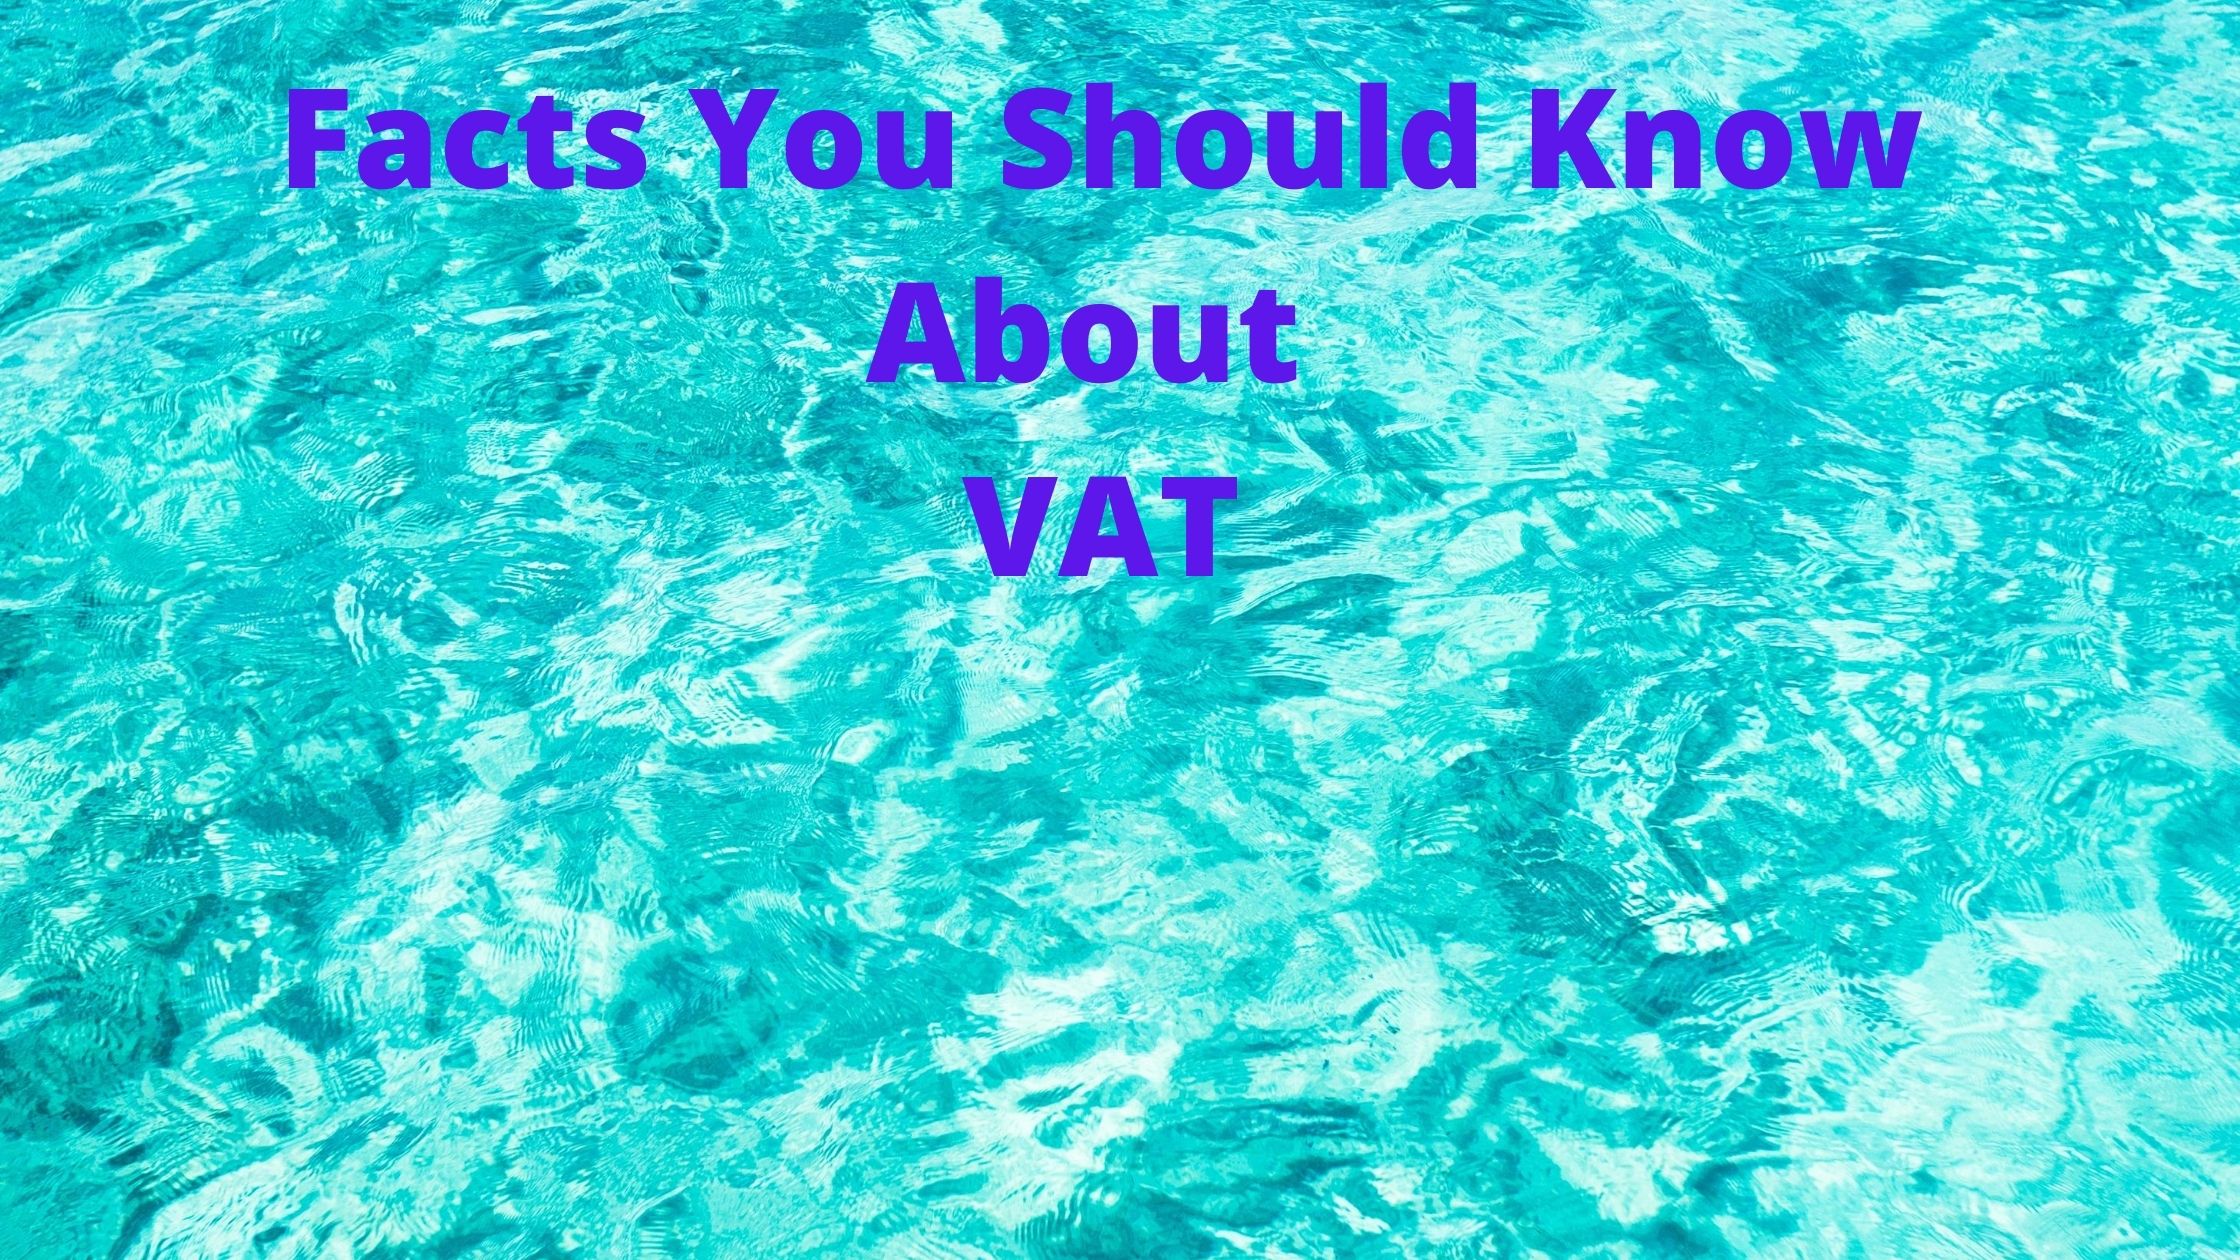 Facts You Should Know about VAT